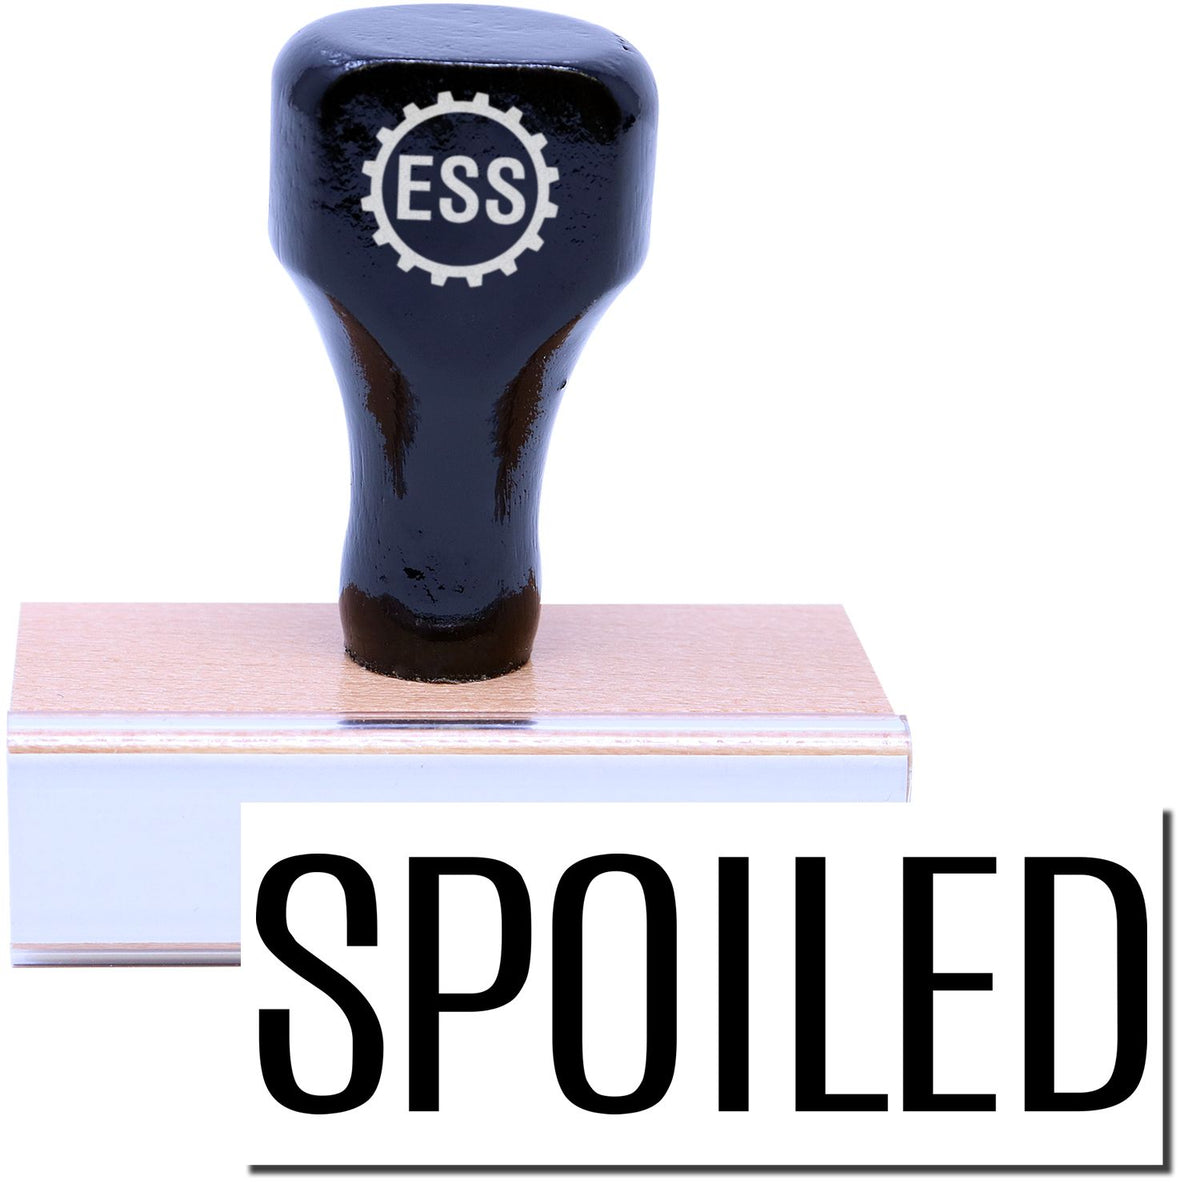 A stock office rubber stamp with a stamped image showing how the text &quot;SPOILED&quot; in a large font is displayed after stamping.